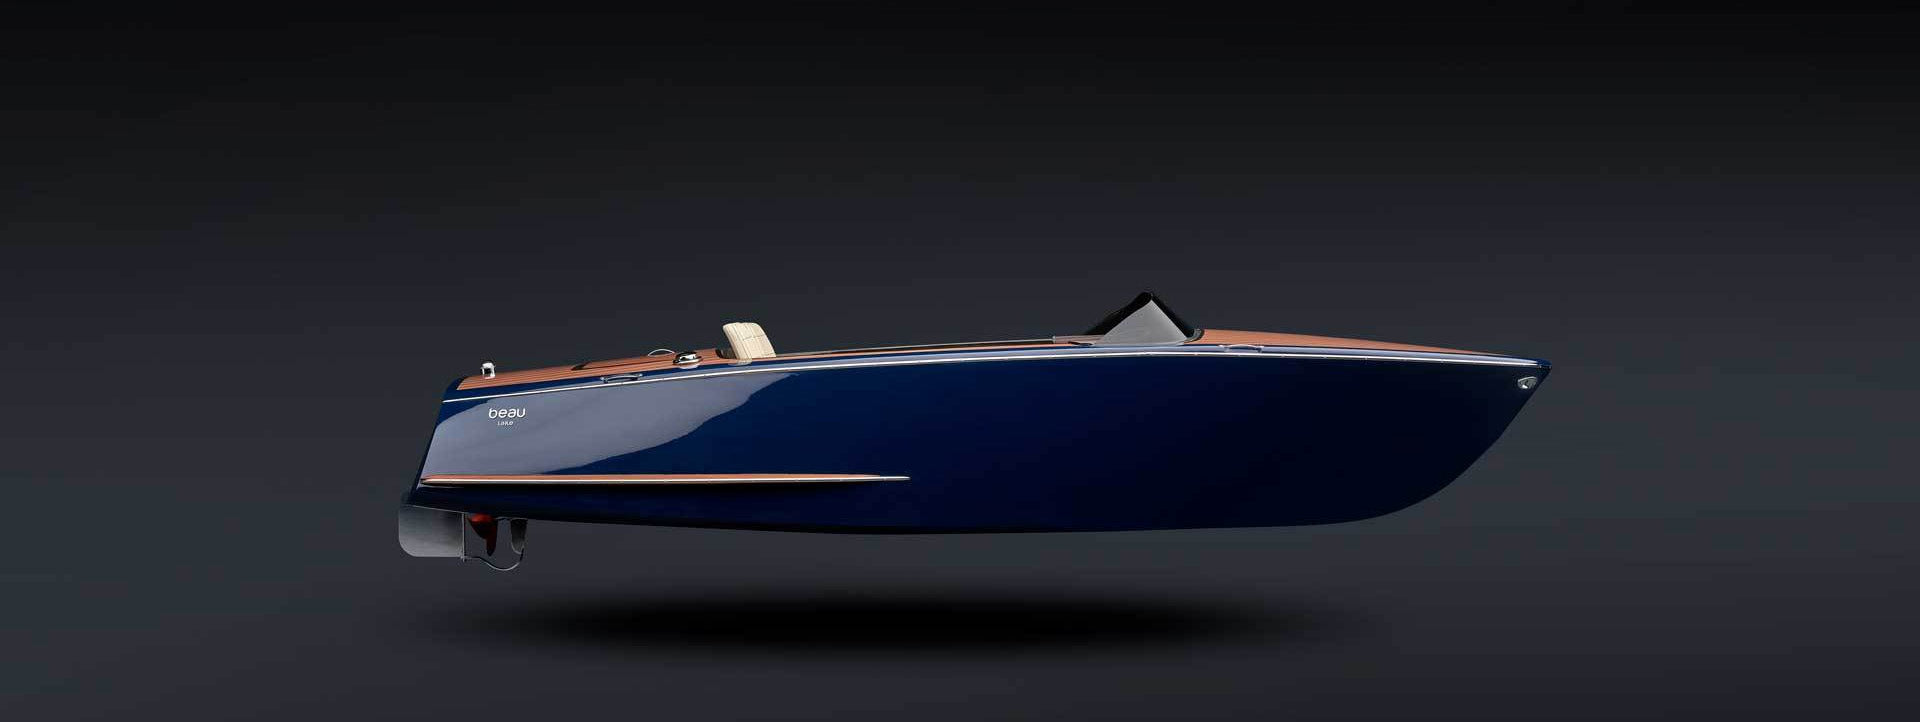 Plugboats - "A beautiful electric runabout debuts in Miami"